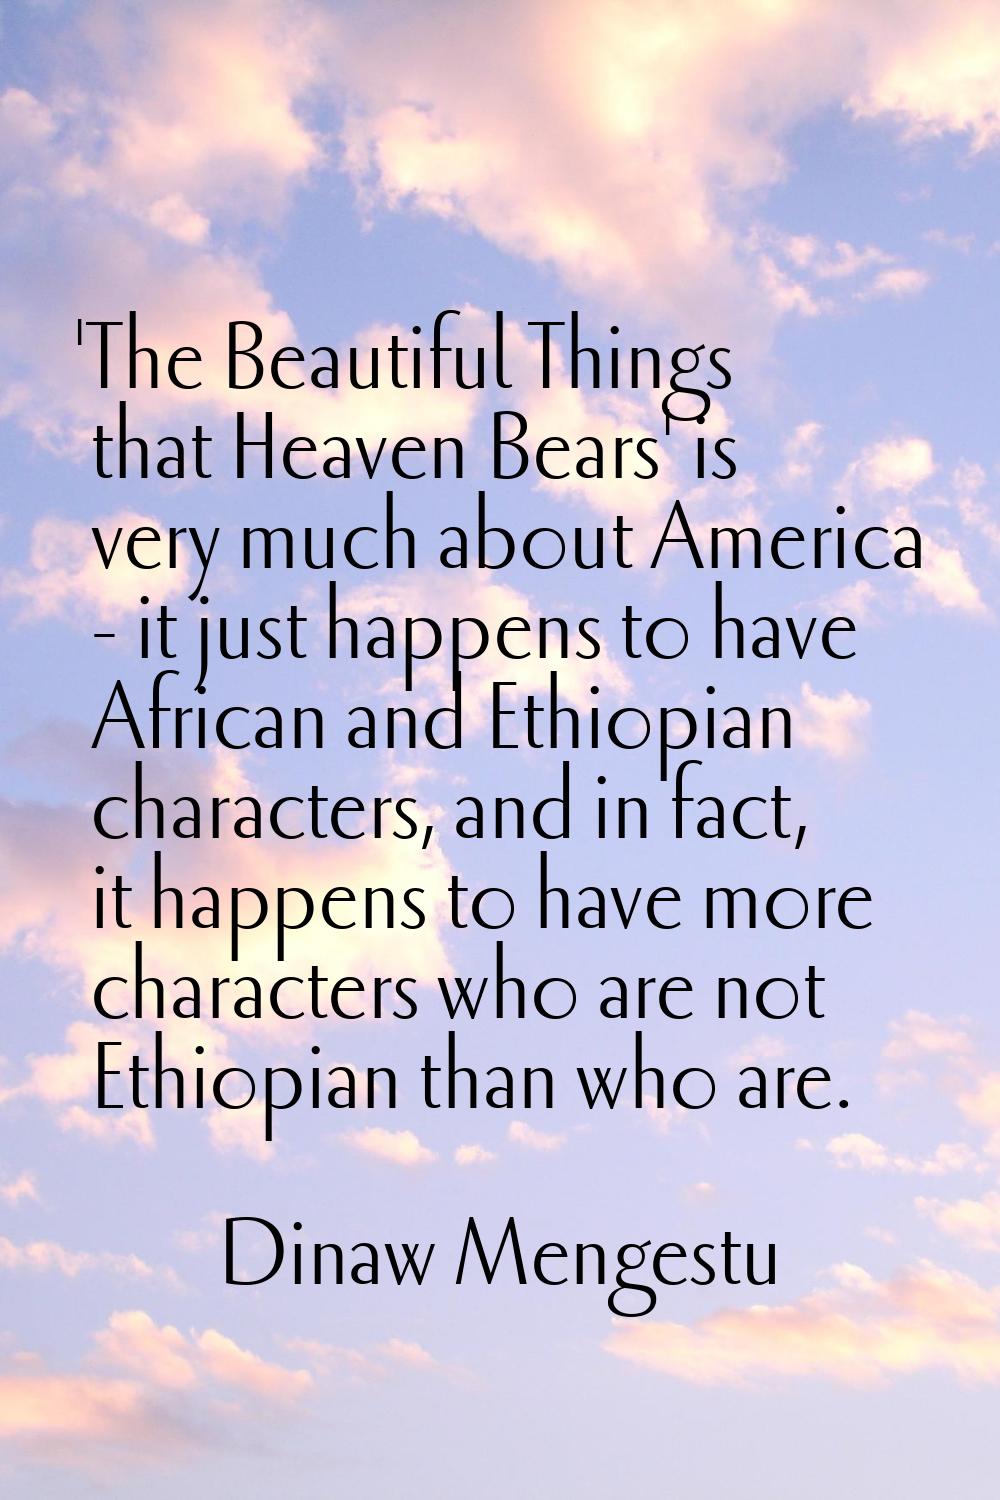 'The Beautiful Things that Heaven Bears' is very much about America - it just happens to have Afric